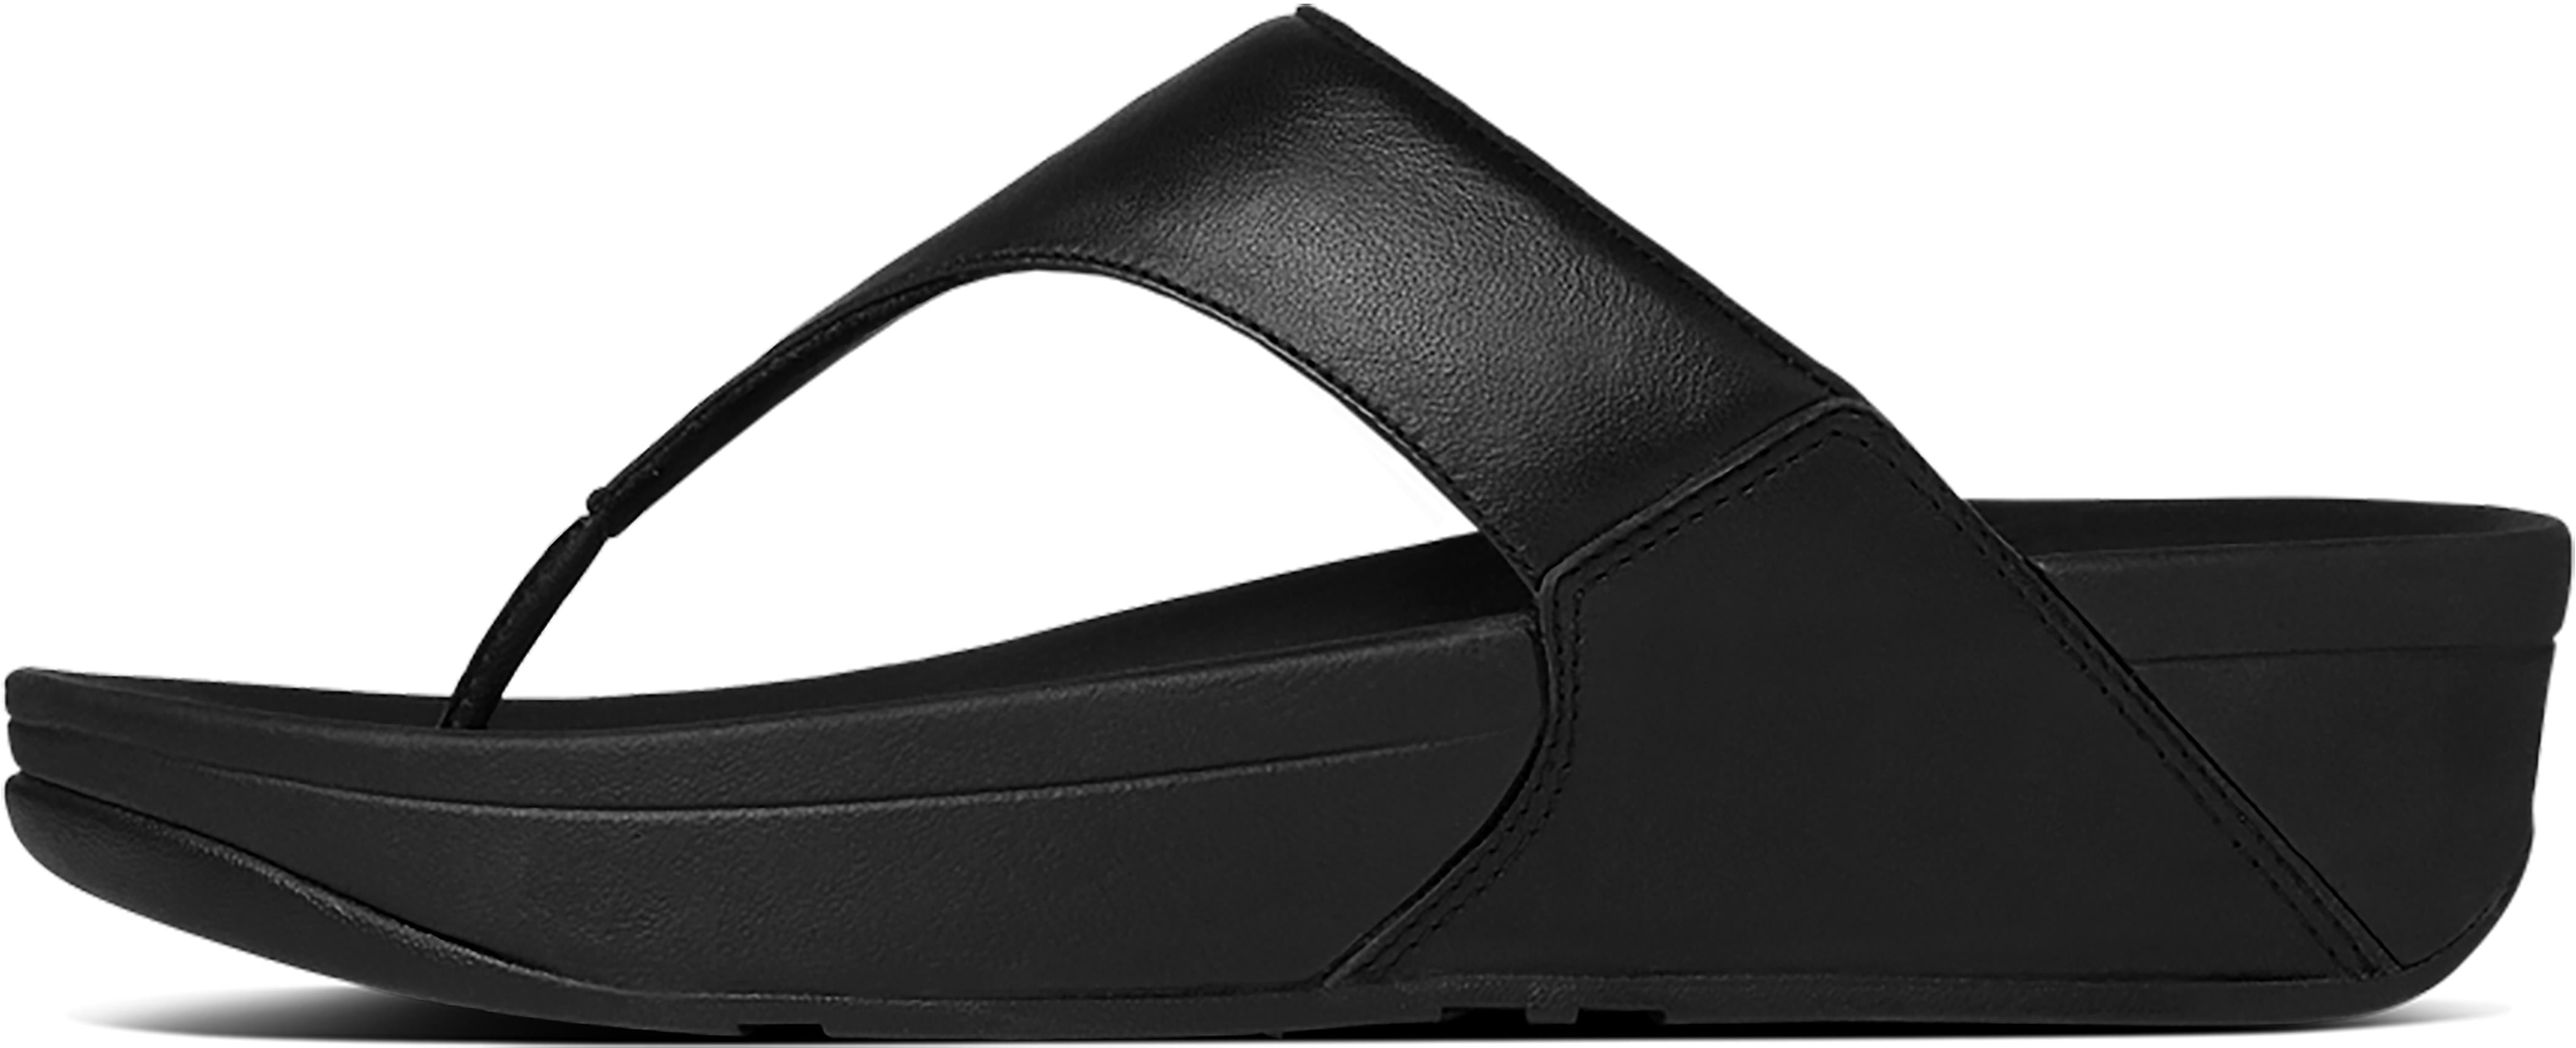 Lulu Leather Toepost in Black from the side